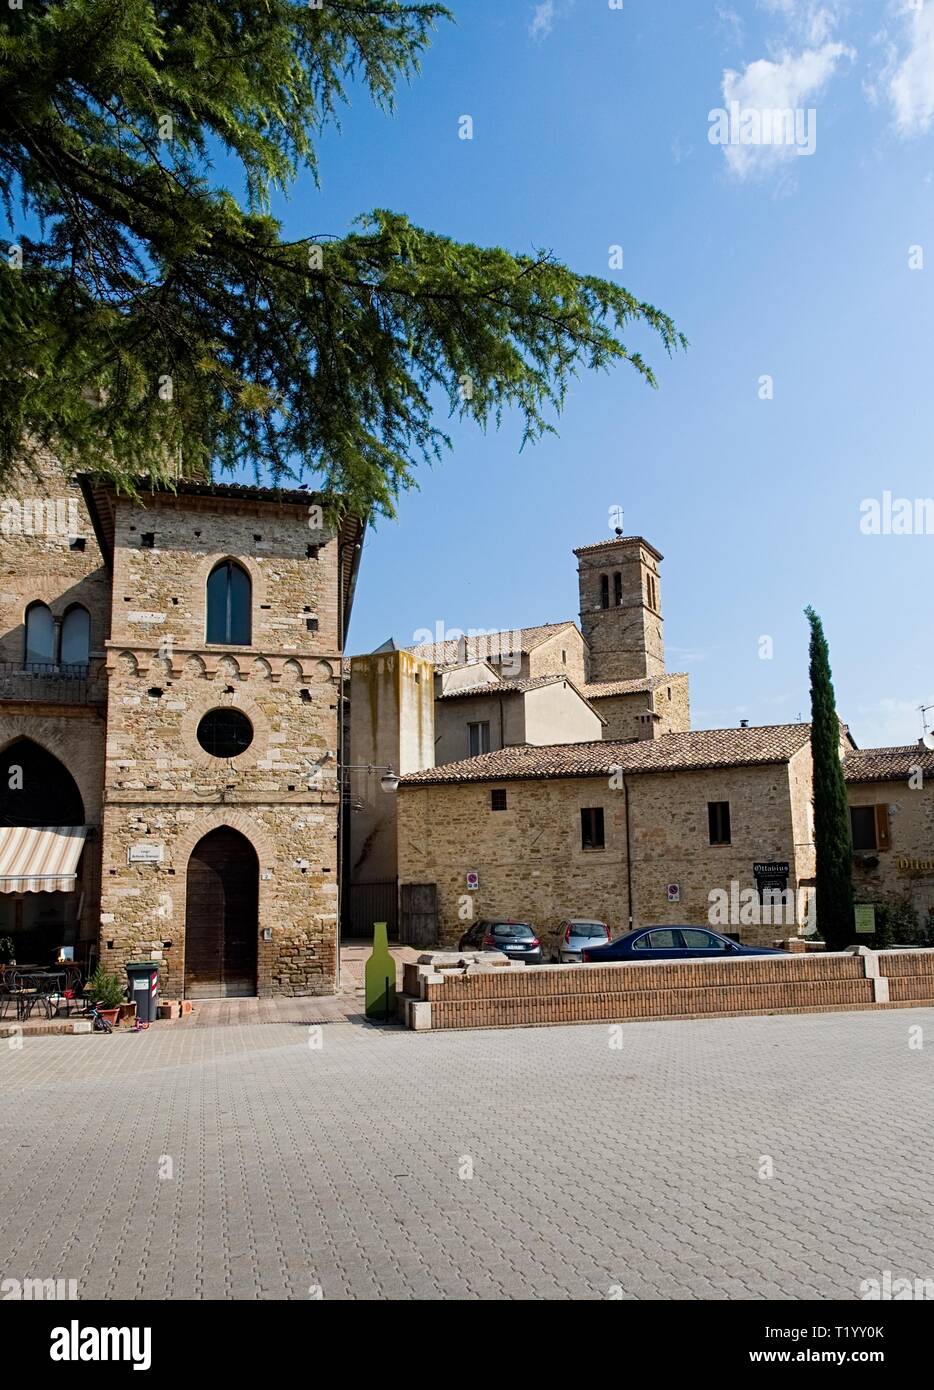 Bevagna Umbria Italy. Square in the medieval, travel, and touristic destination of Bevagna. Stock Photo